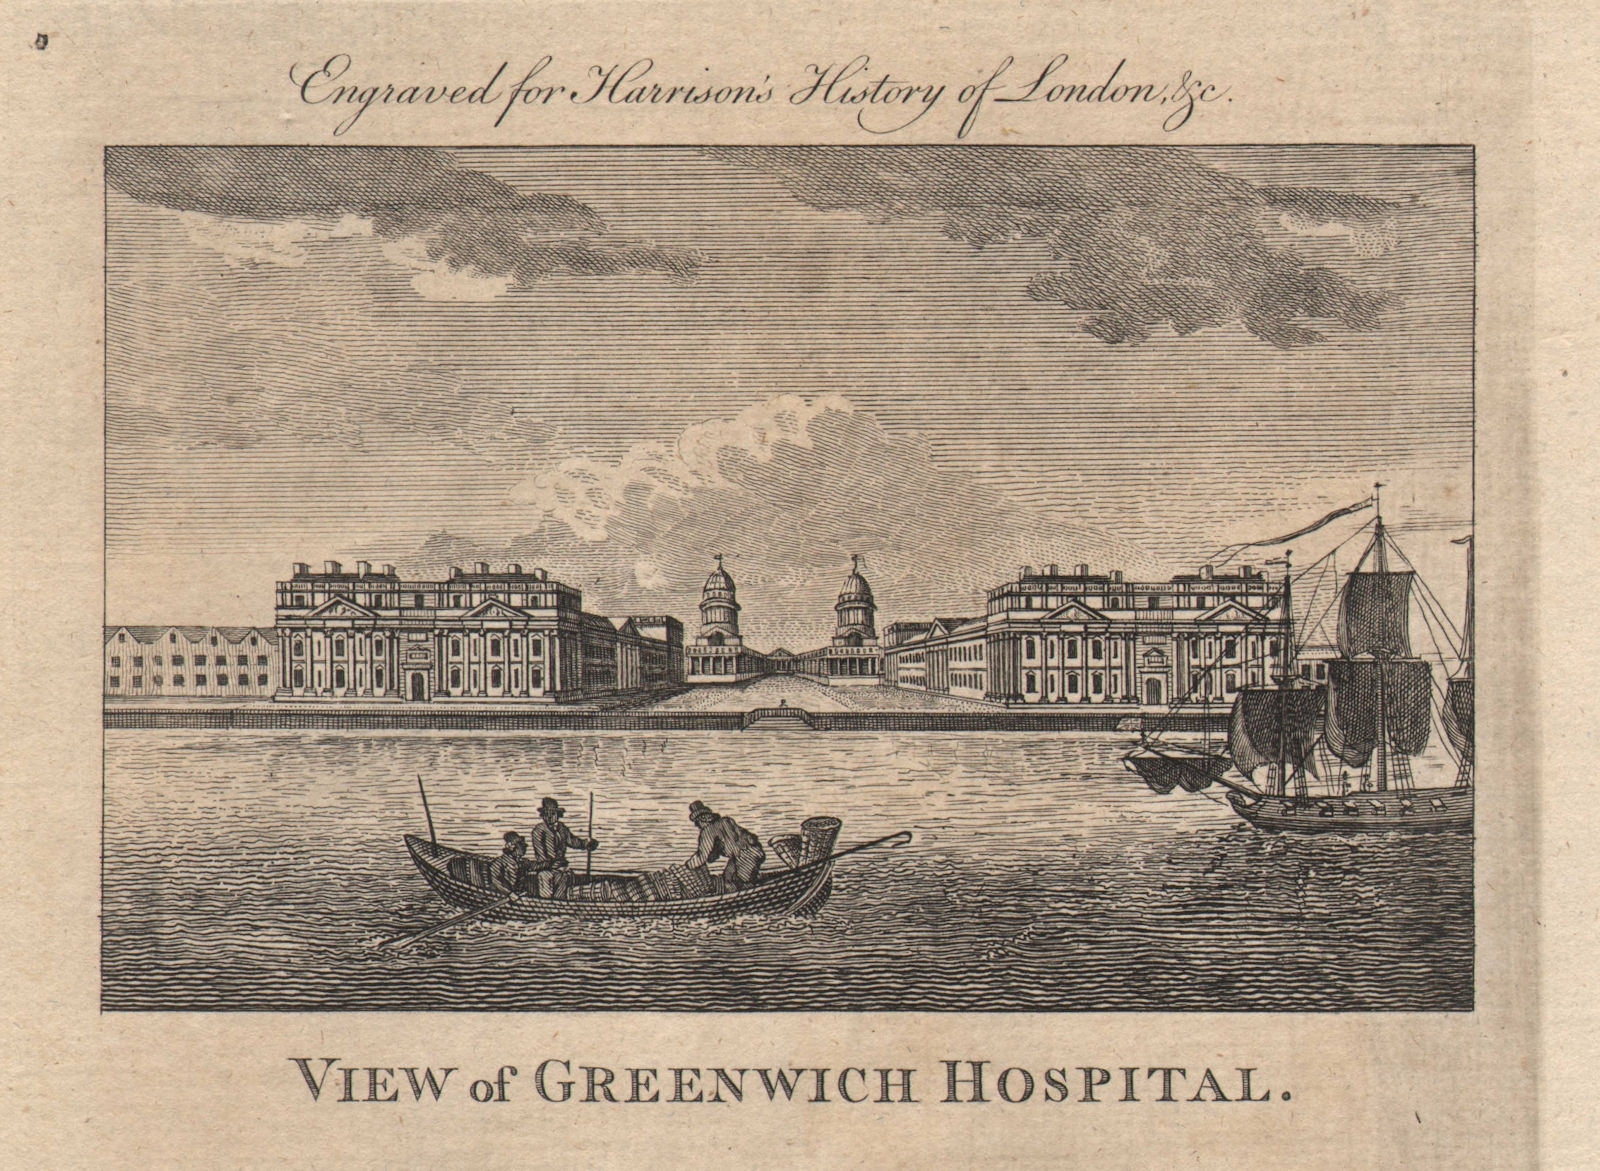 "View of Greenwich Hospital". Old Royal Naval College, London. HARRISON 1776